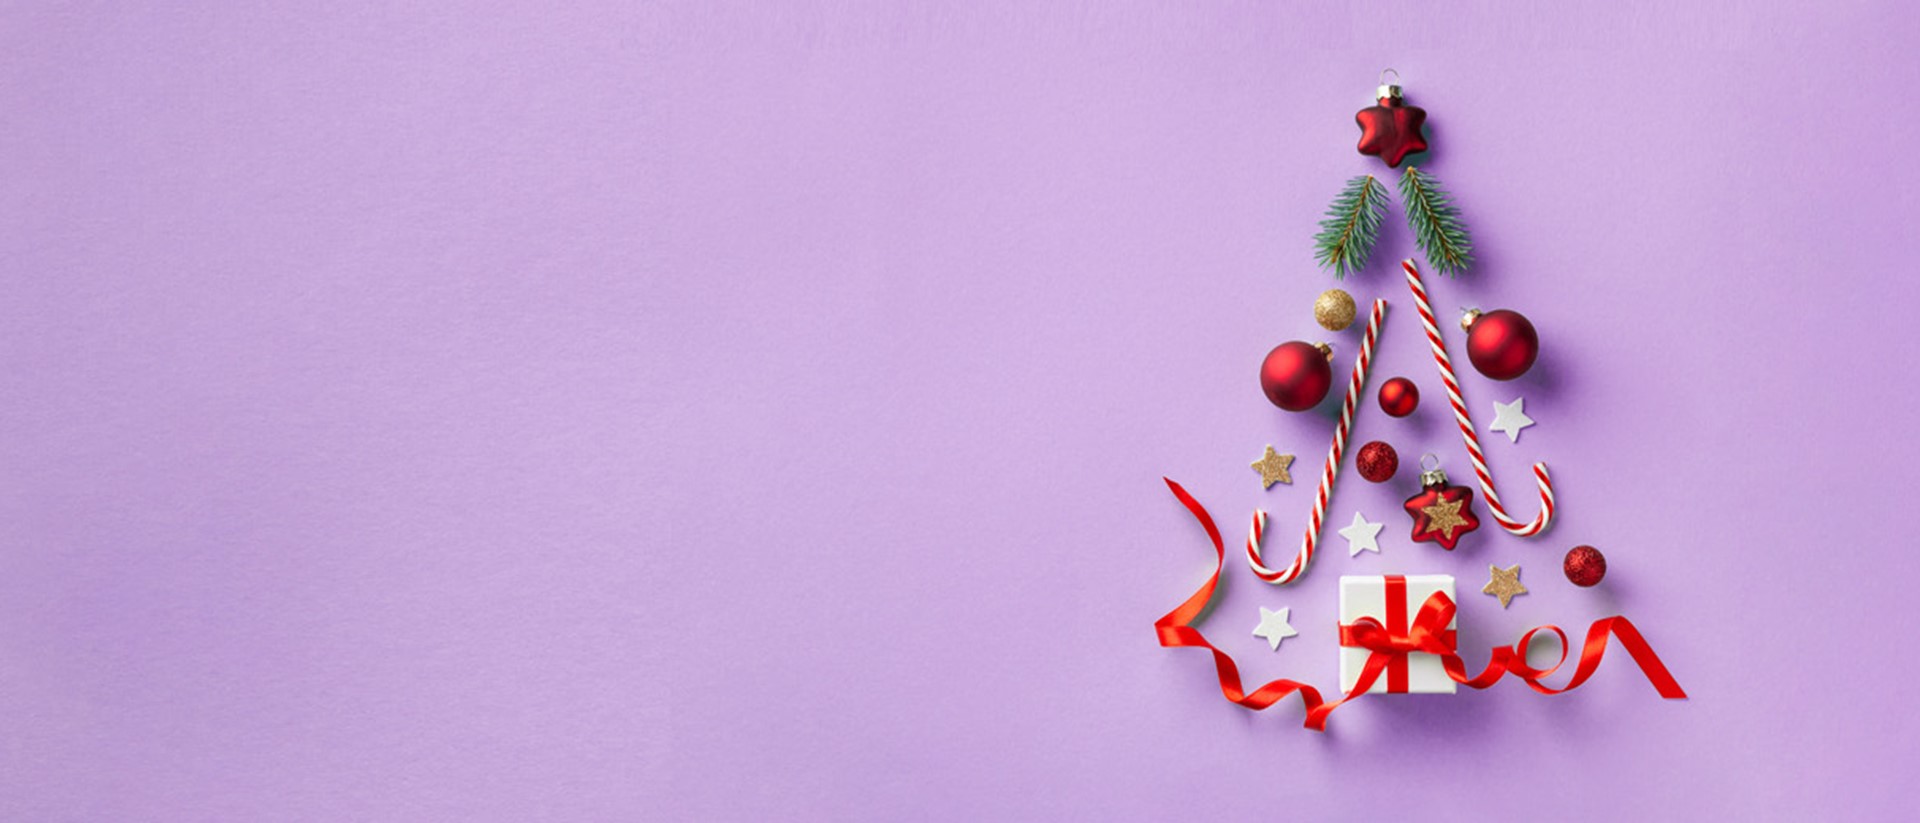 Image of Christmas items forming a shape of a Christmas tree against a purple background